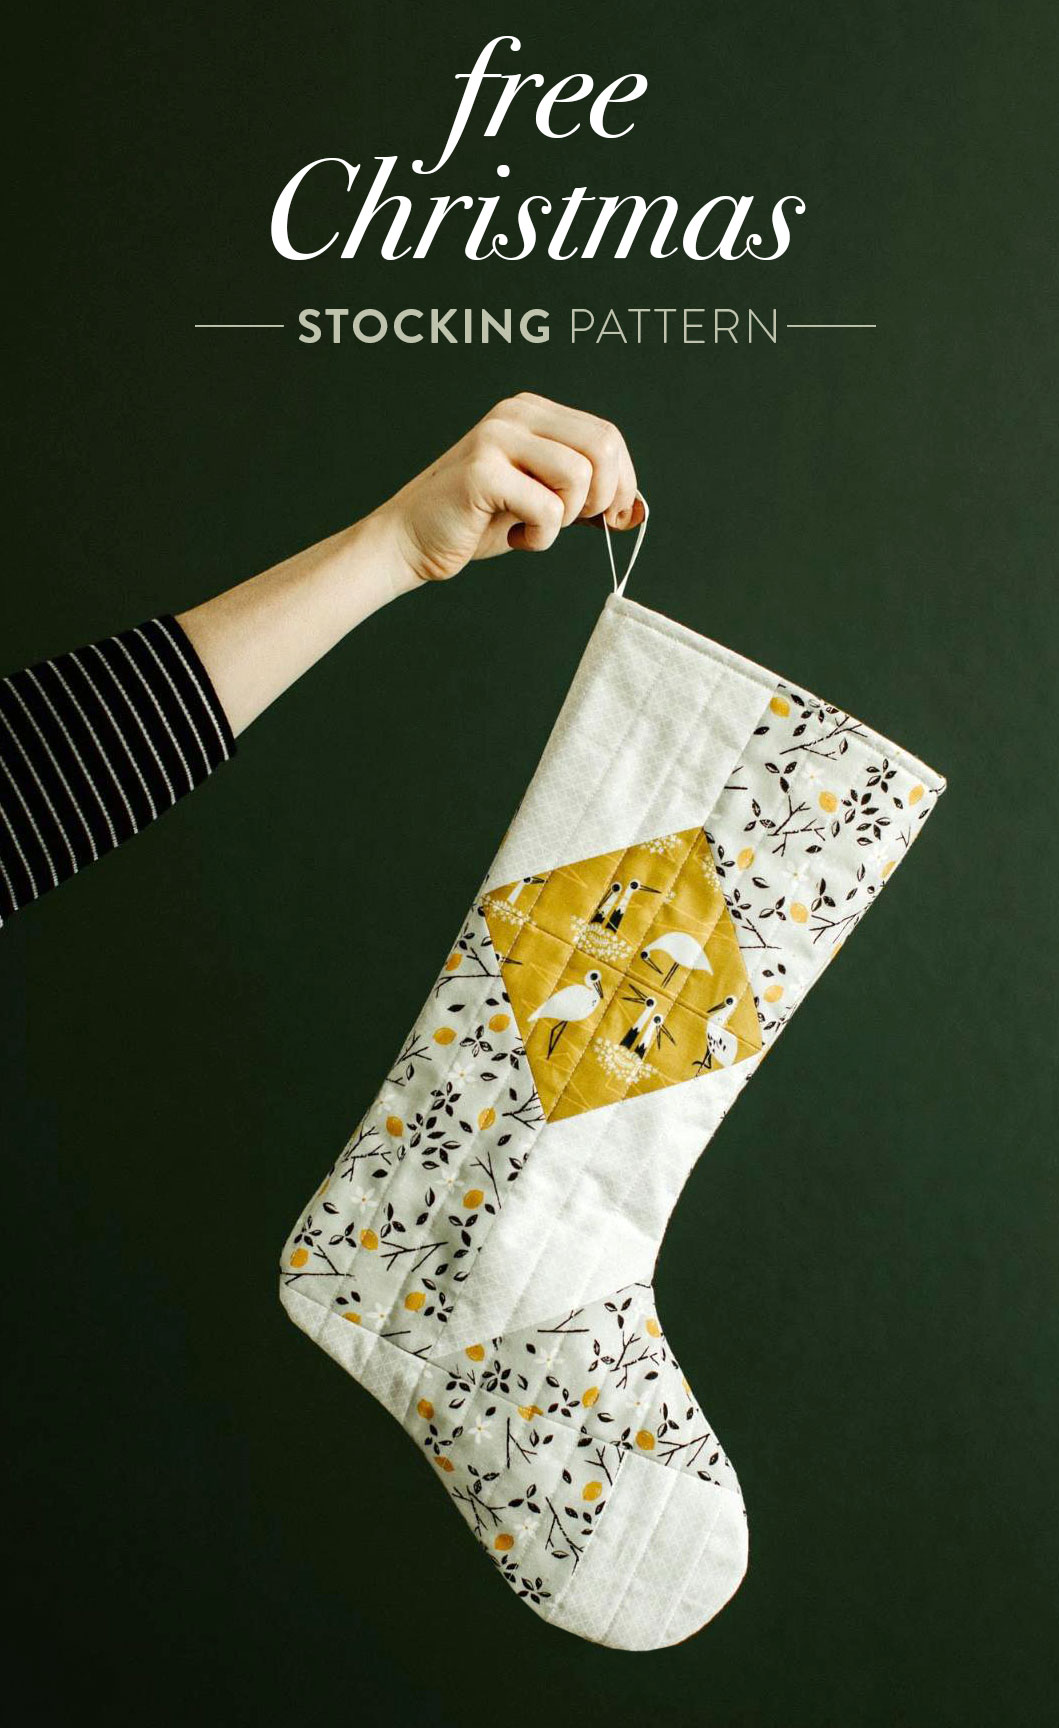 A free quilted Christmas stocking pattern right in time for the holidays! Sew a simple, modern stocking with this step by step tutorial. suzyquilts.com #christmasstocking